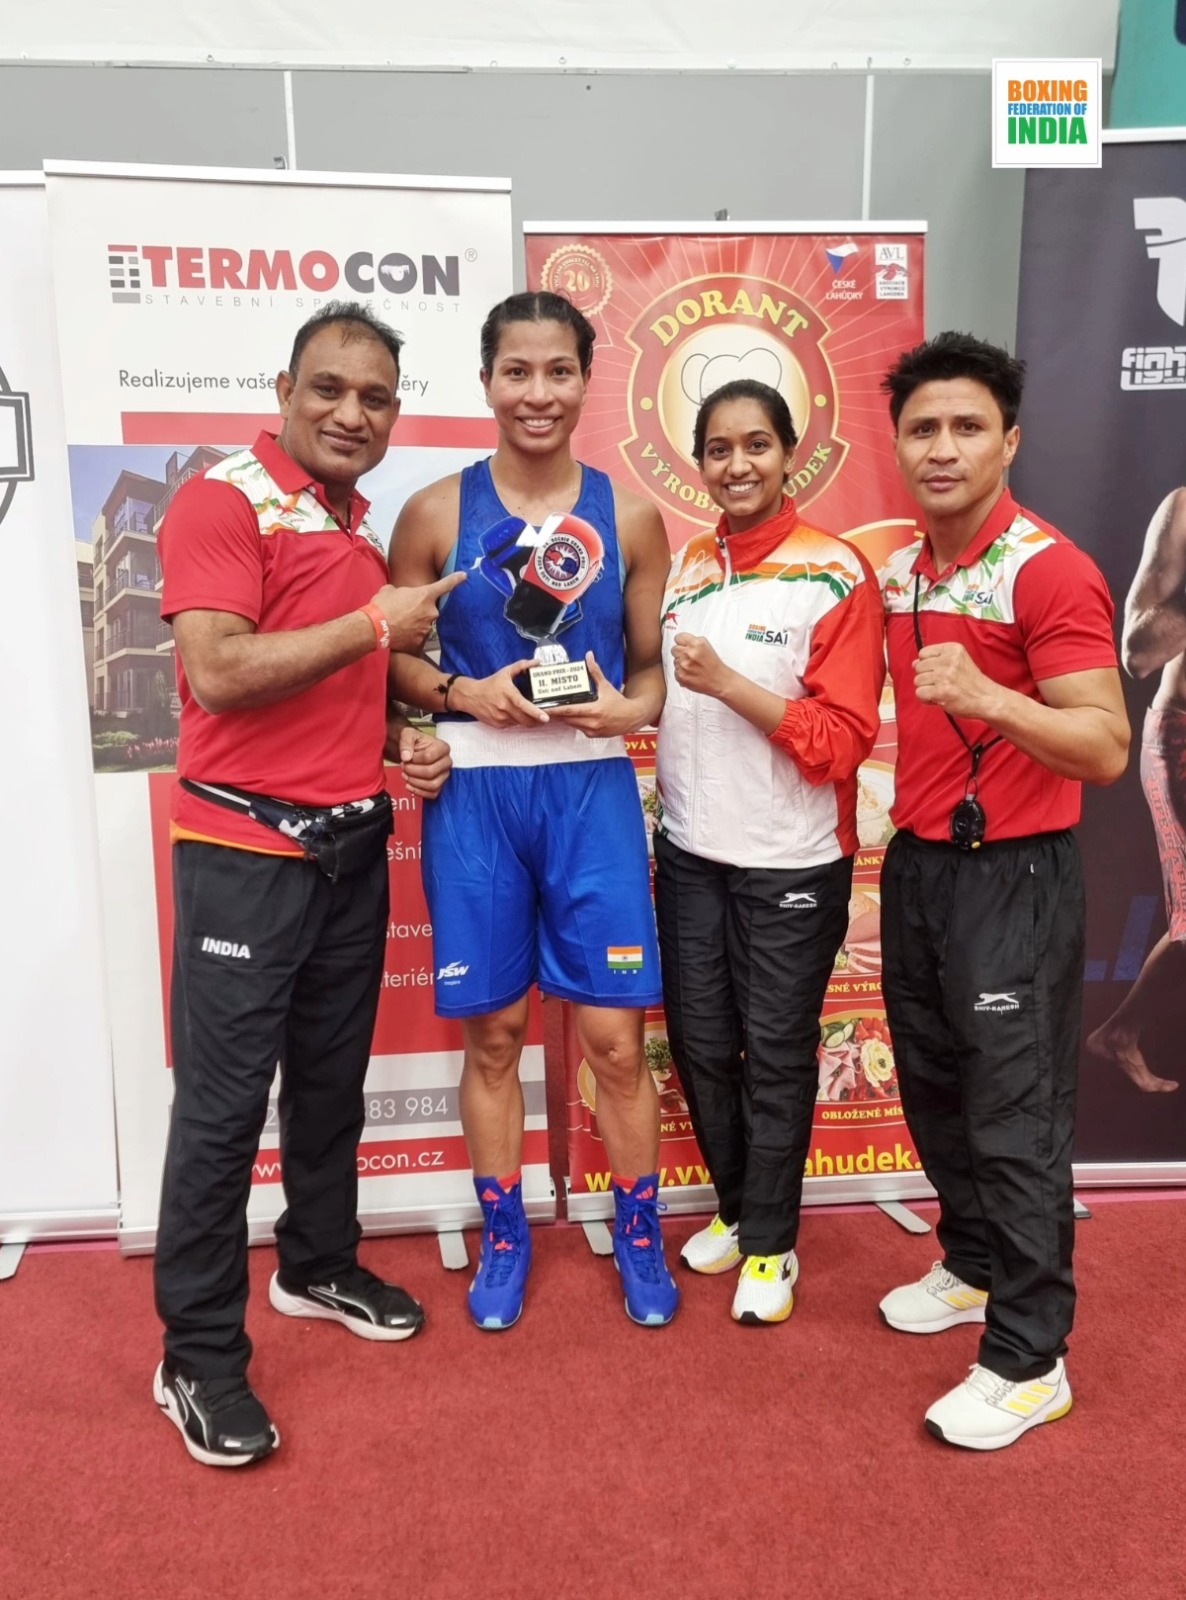 Lovlina Borgohain with her team after winning a silver at the Grand Prix in Czech Republic